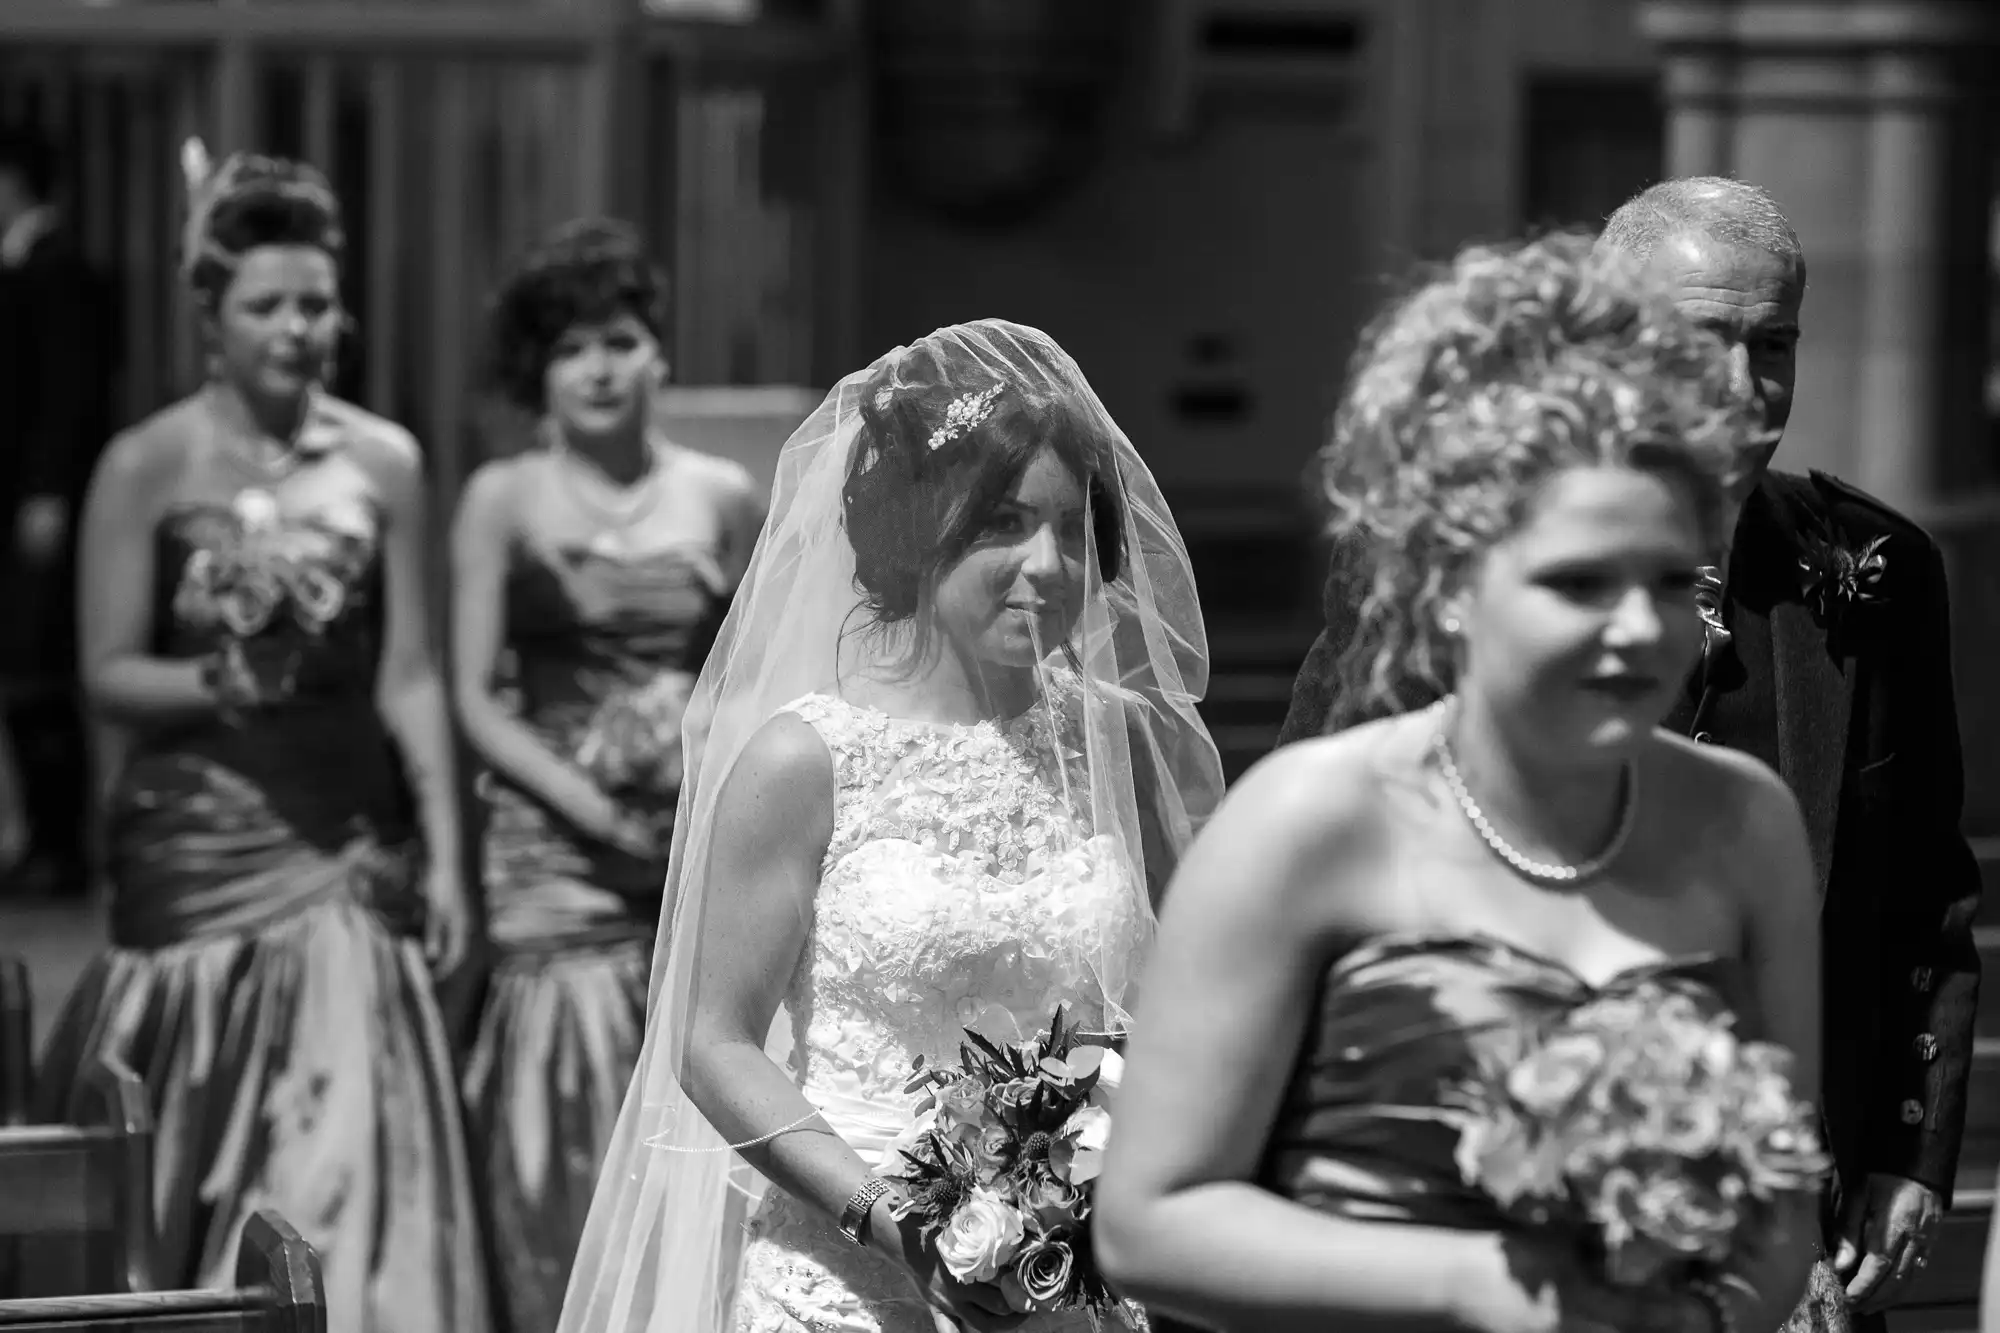 A black and white photo of a bride walking down the aisle, accompanied by guests in formal wear.